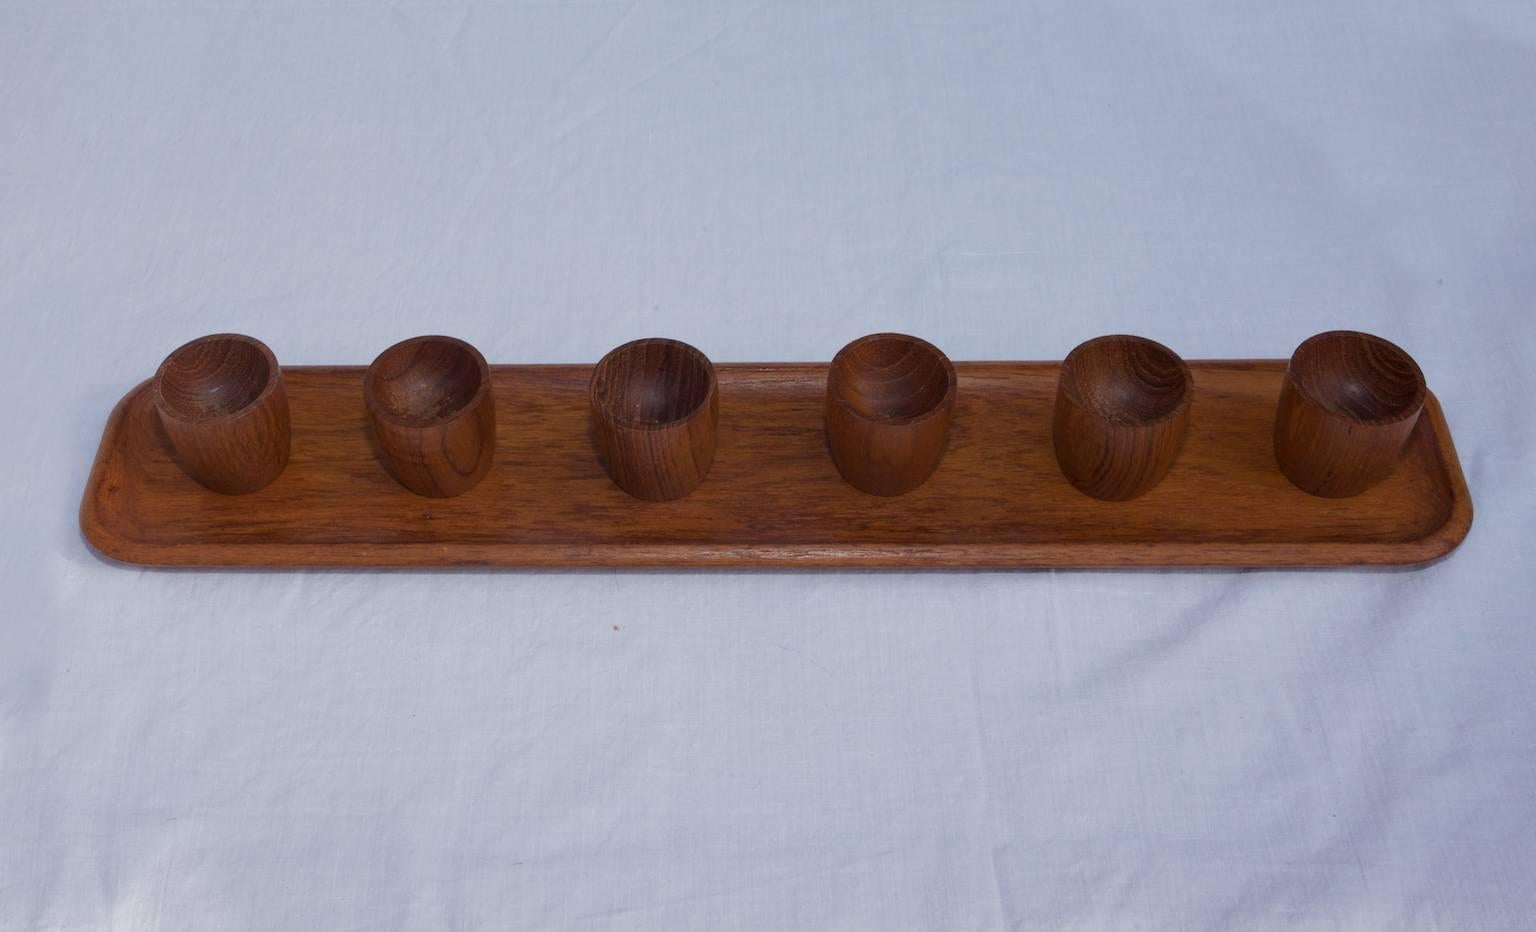 Another beautiful example of a beautiful everydayware from Karl Holmberg in Götene Sweden. Six egg cups with a matching characteristic elongated tray of Holmbergs design. Produced in the late 1960s or early 1970s.

The tray is branded and two of